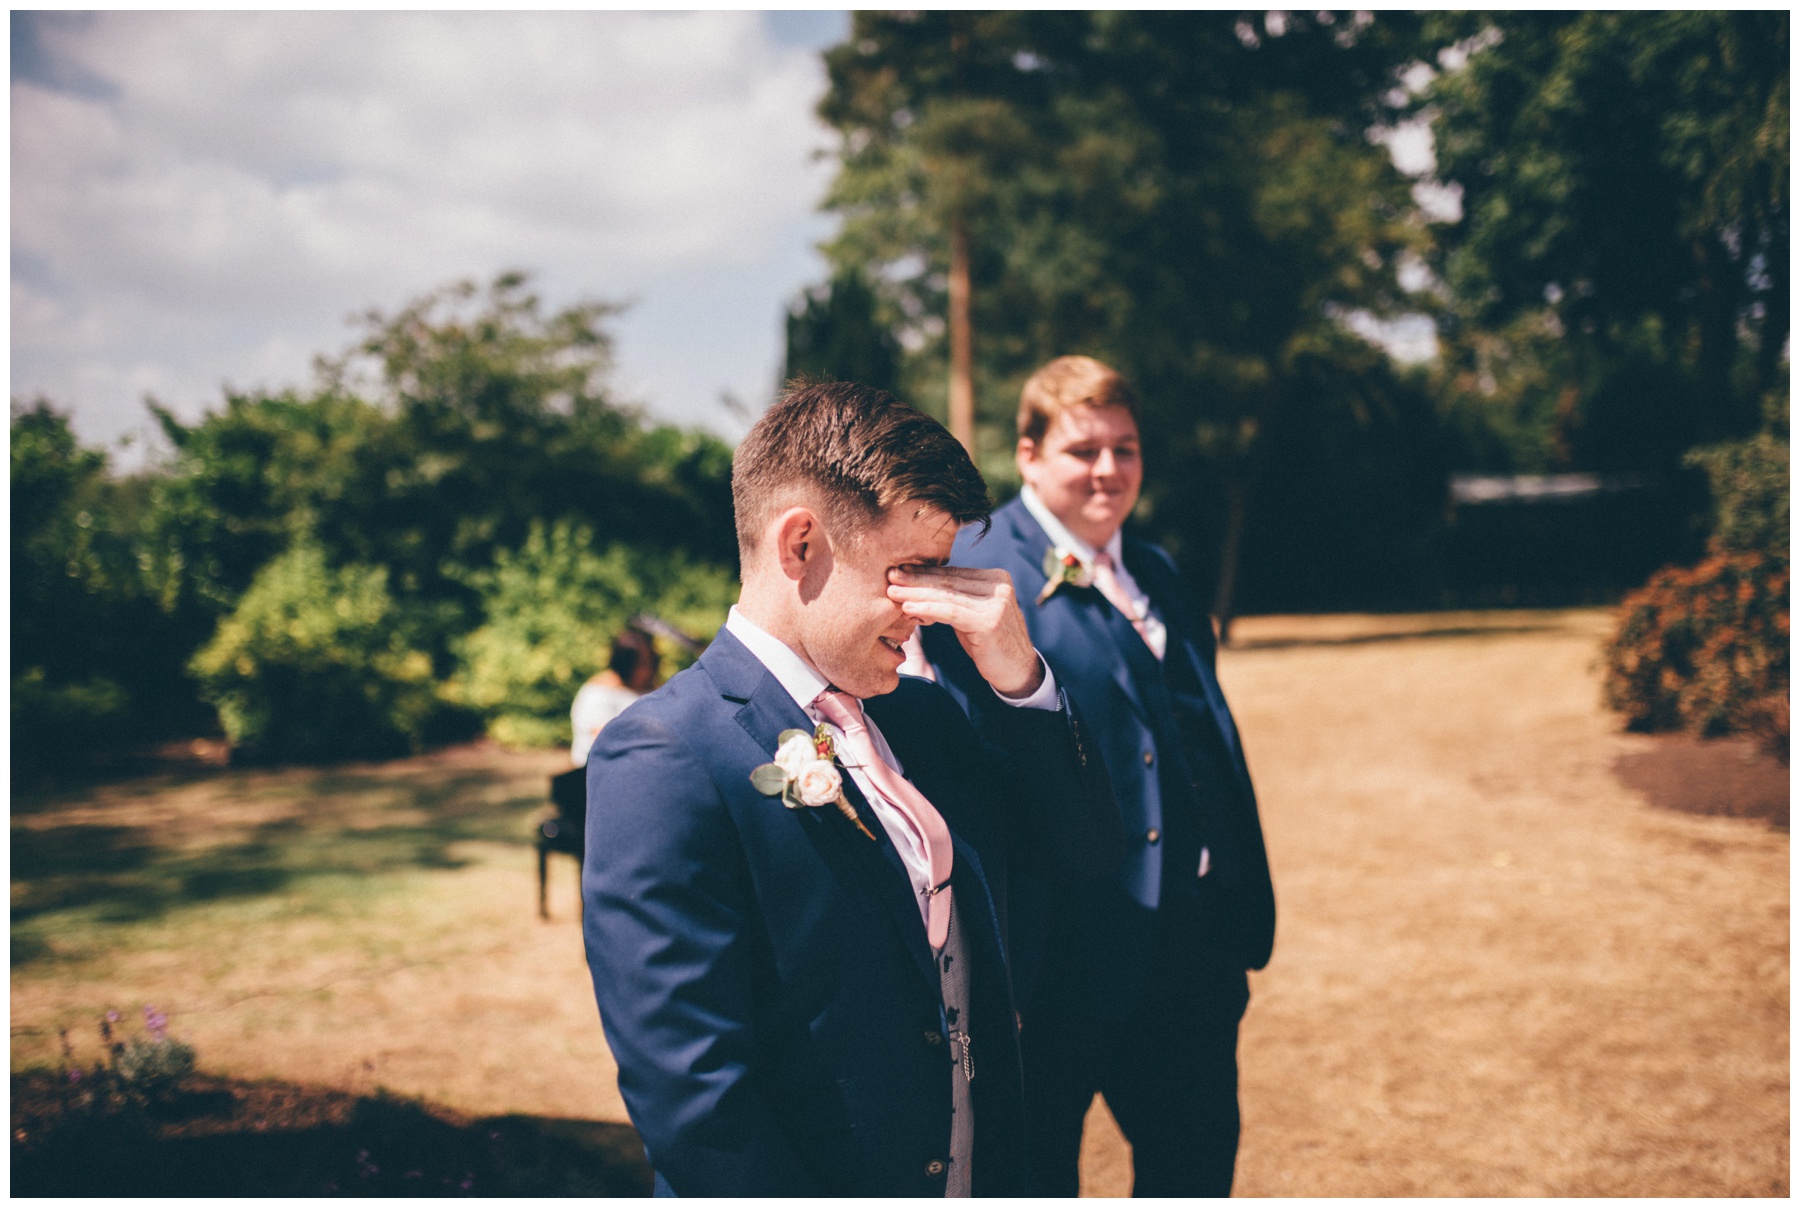 Groom cries as he watches his bride walk down the aisle at their outdoor wedding ceremony at Tilstone House in Cheshire.